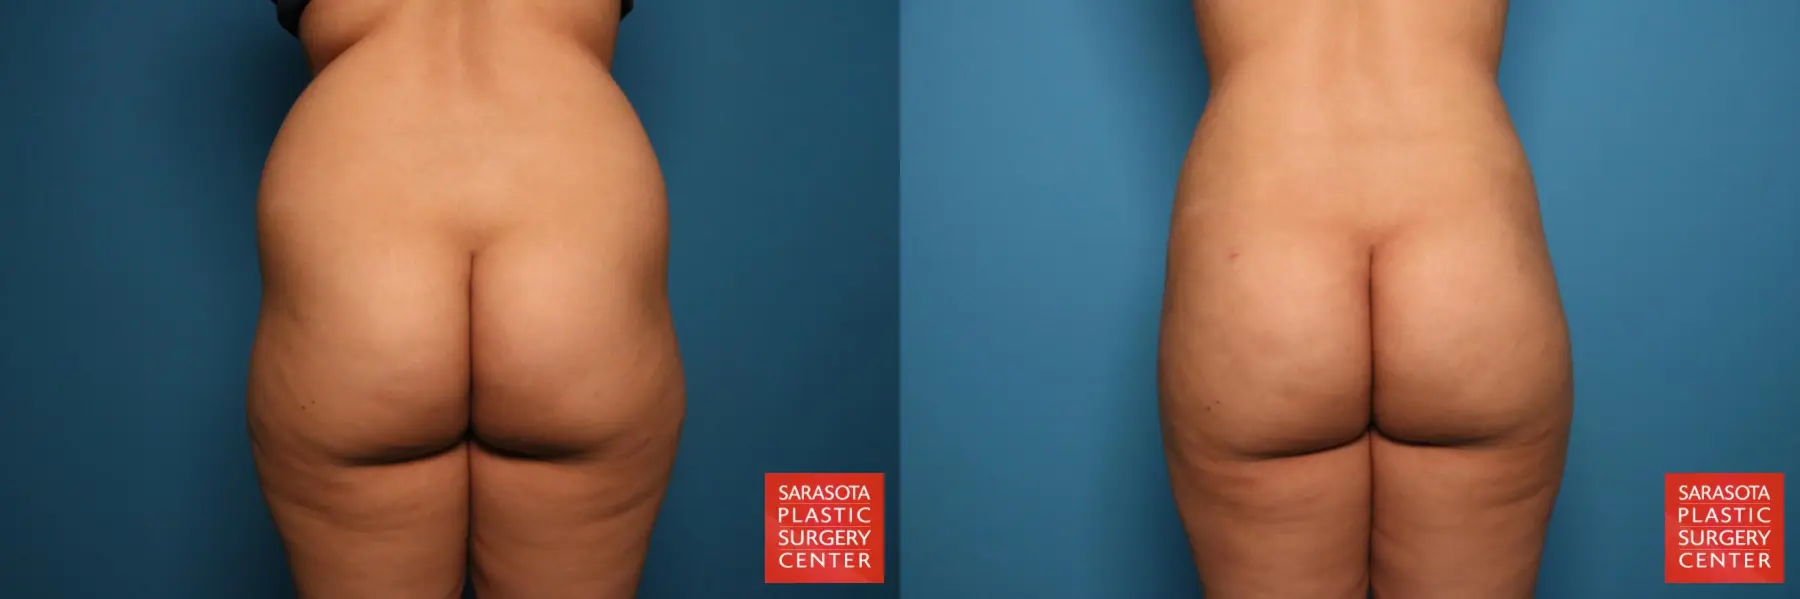 Liposuction: Patient 15 - Before and After 4